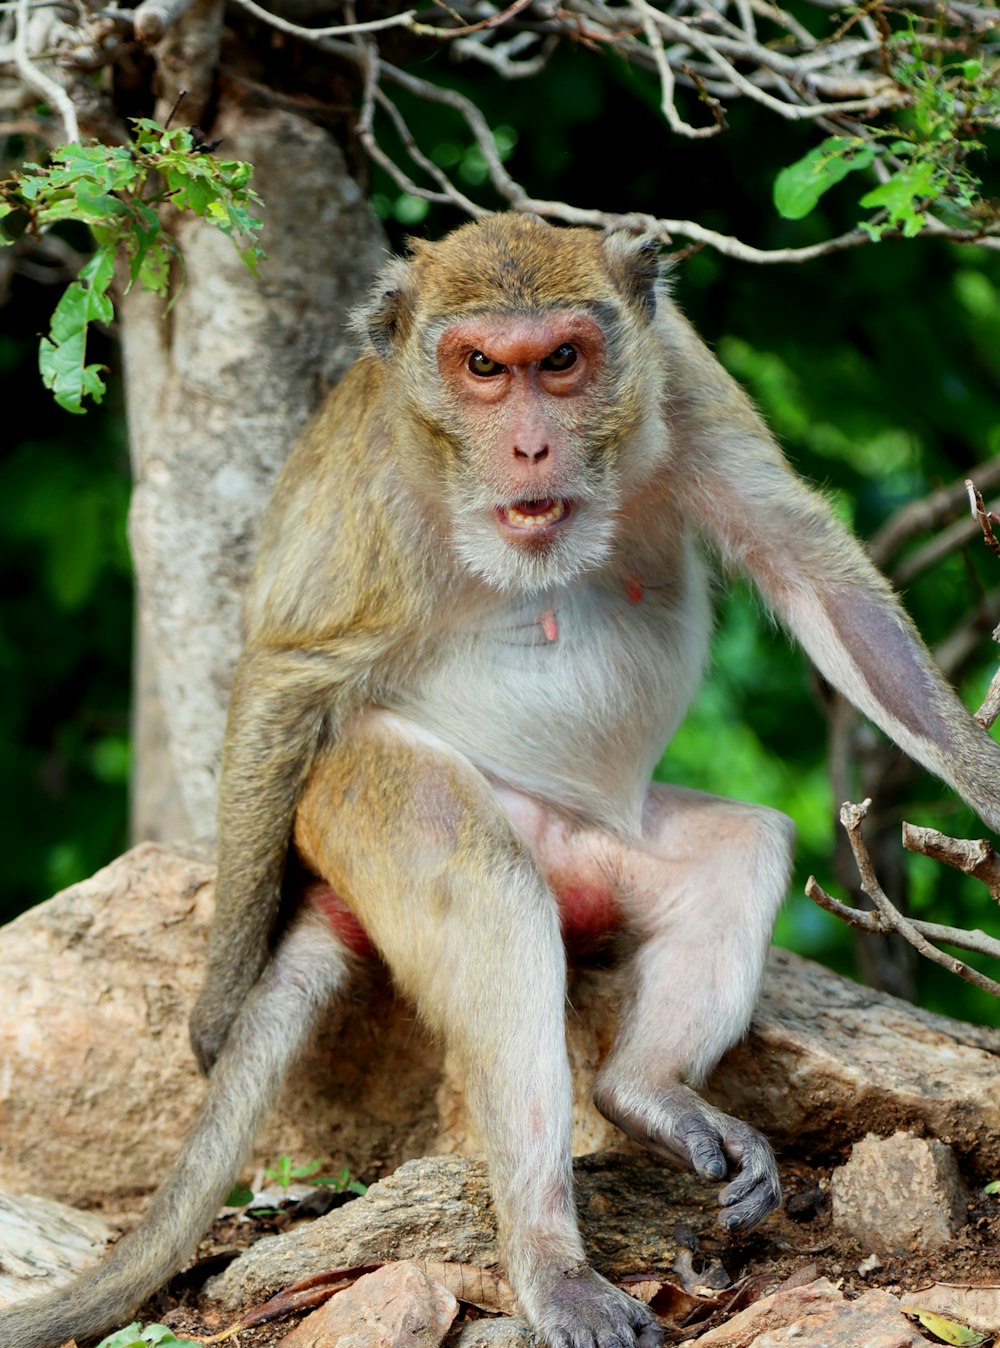 a monkey sitting on a rock in a forest